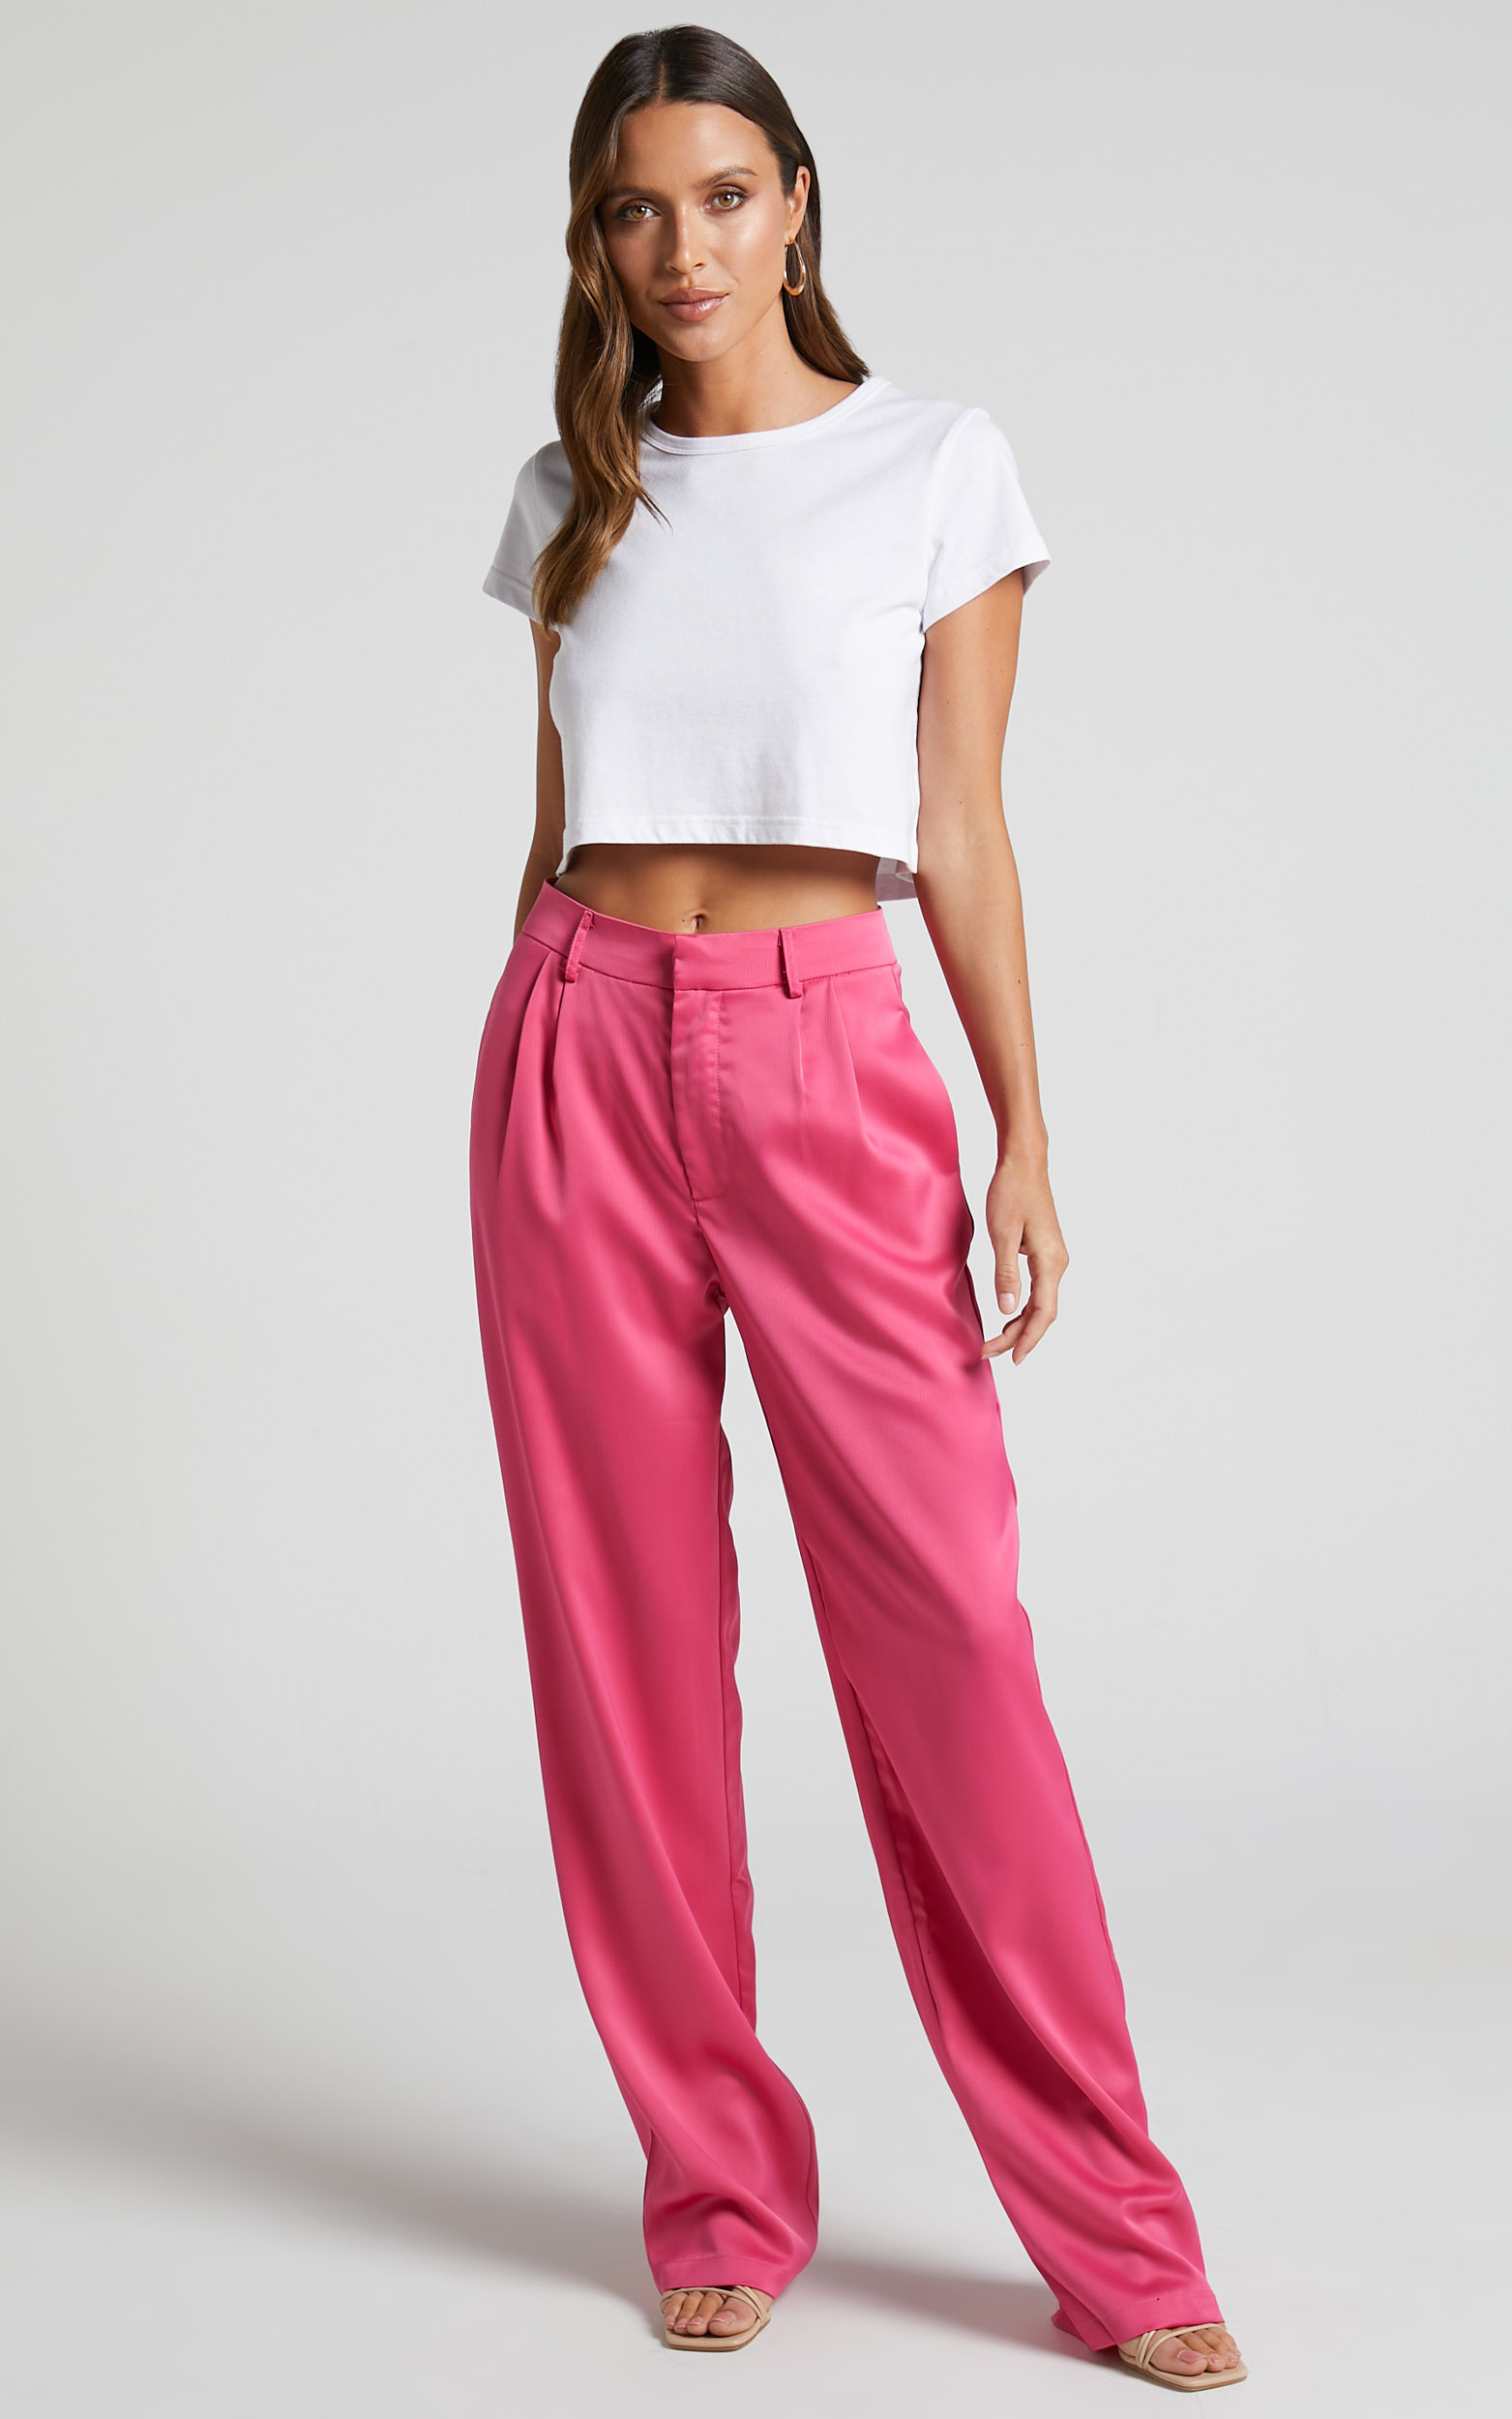 Jannie Pants - High Waist Tailored Pants in Pink - 04, PNK1, hi-res image number null